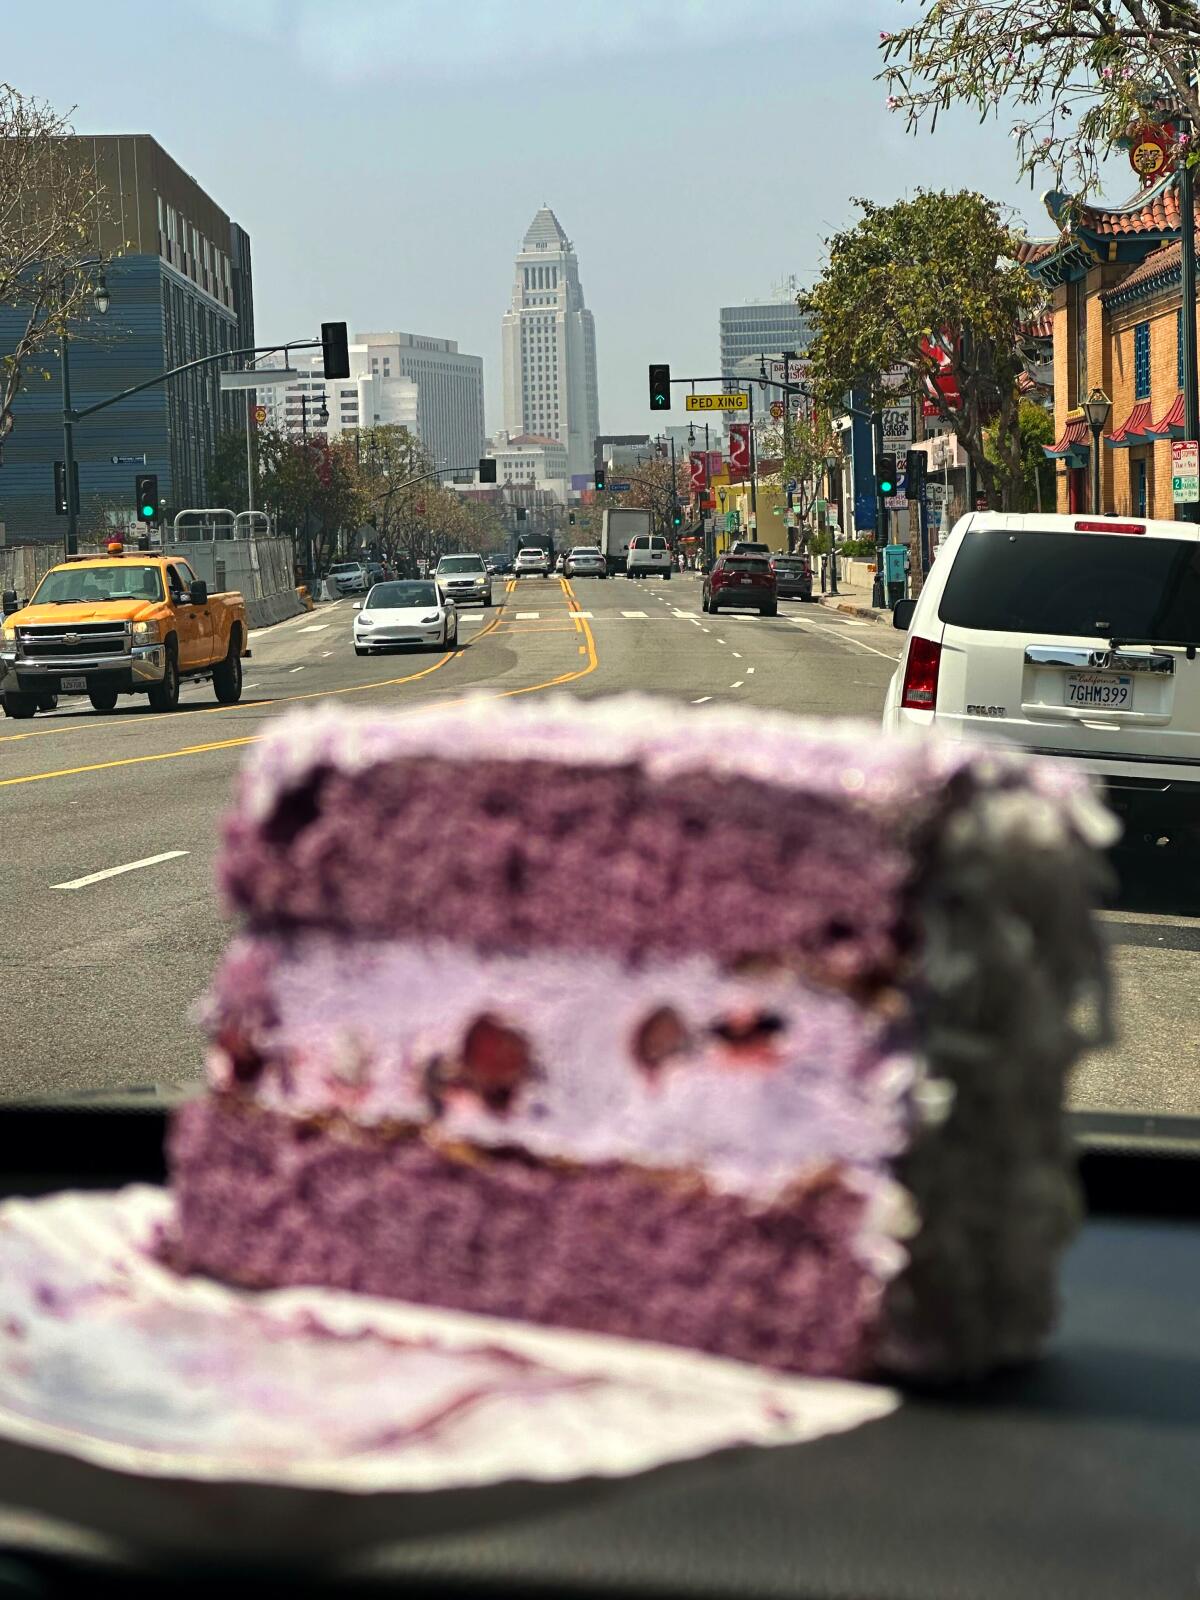 Can you eat a piece of cake in your car without making a total mess? I'm about to find out.